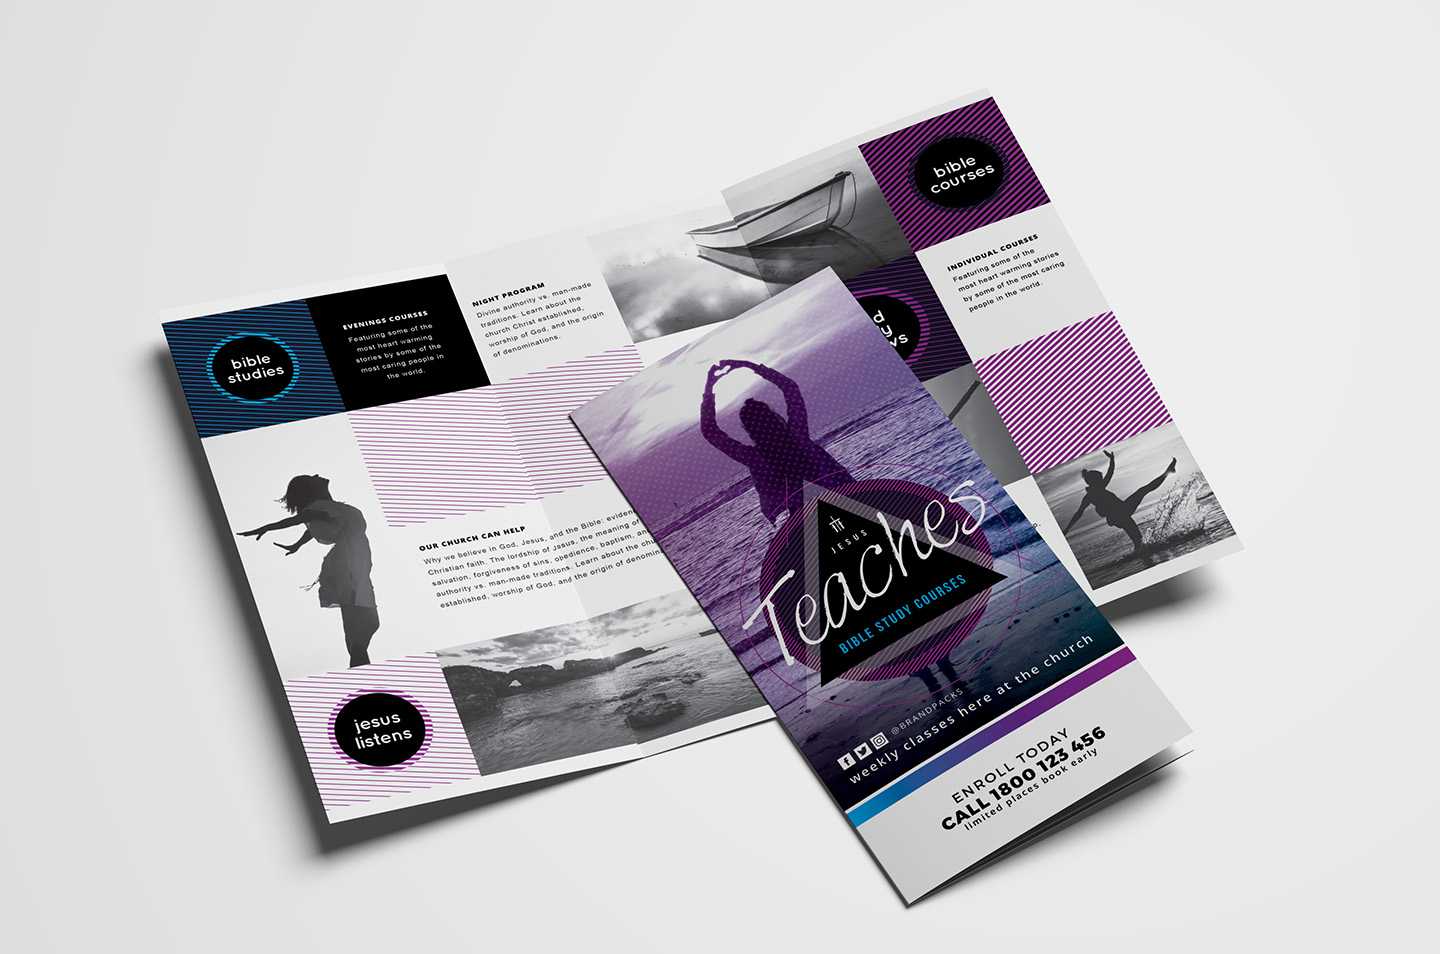 Free Church Templates – Photoshop Psd & Illustrator Ai Regarding Free Illustrator Brochure Templates Download